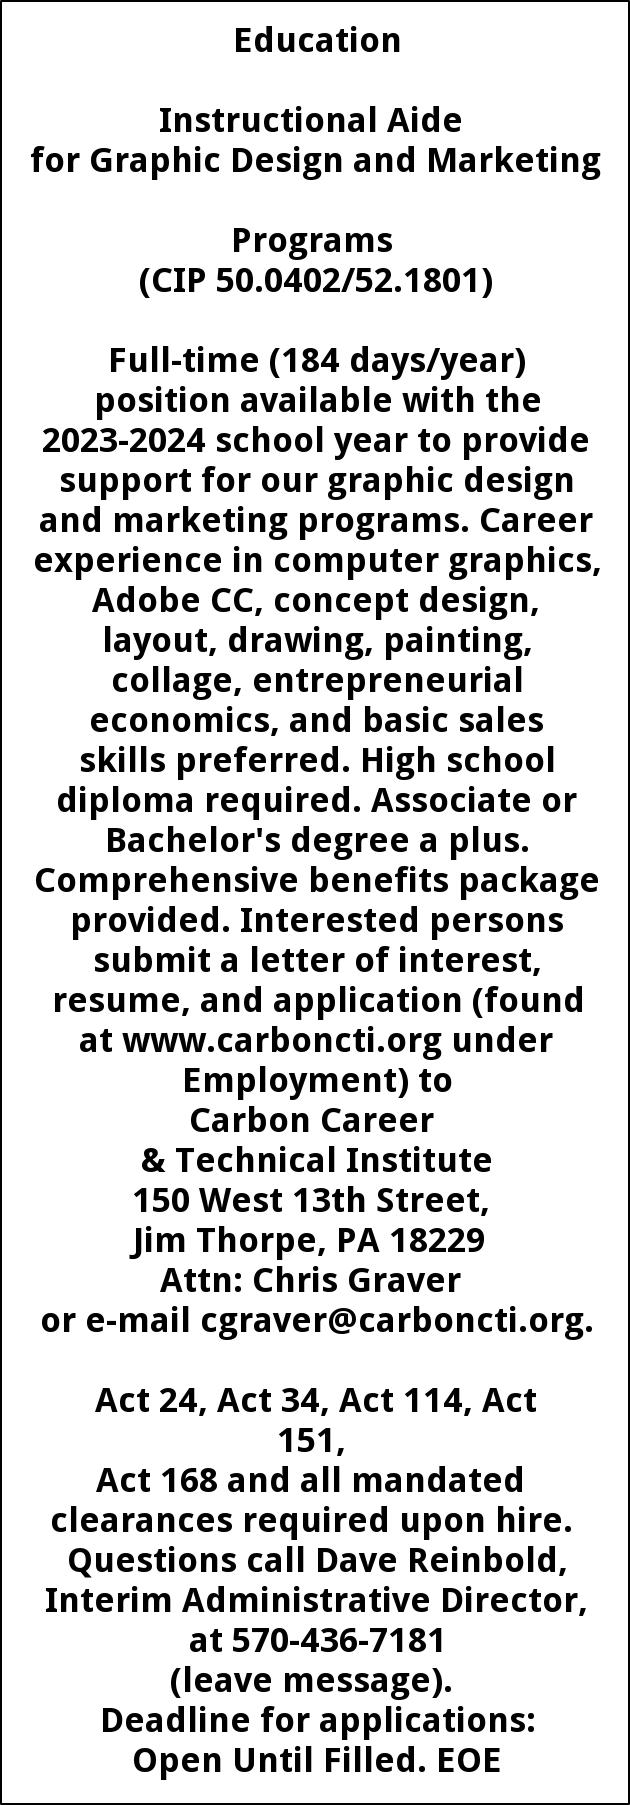 Instructional Aide for Graphic Design And Marketing